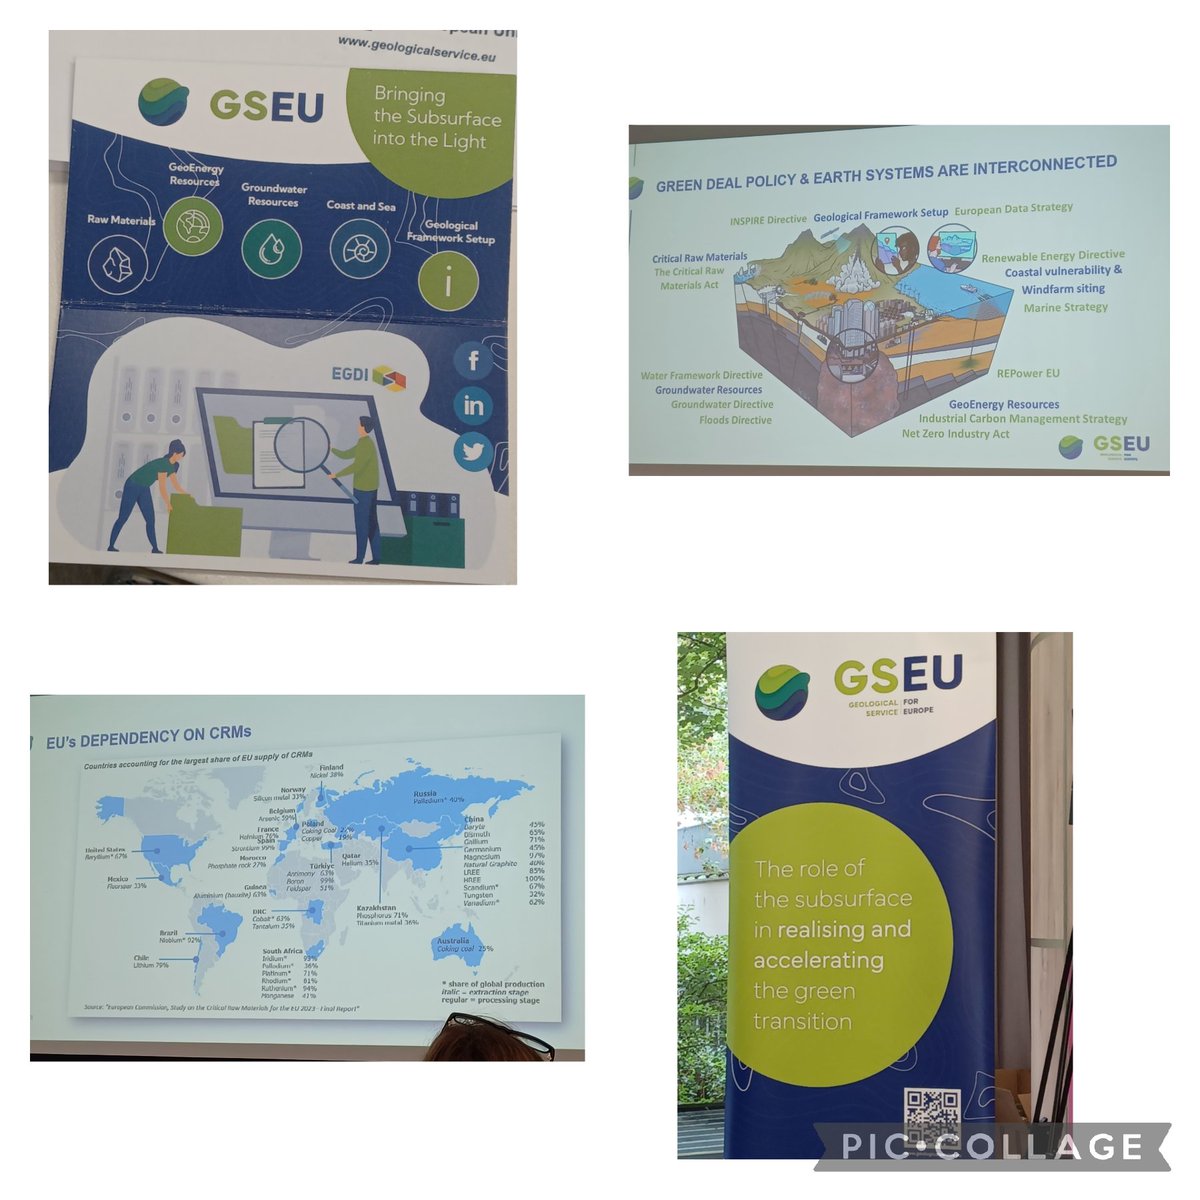 A Geological Service for Europe! Update on progress @GeoServiceEU after 1 year. Ambitious plans for #groundwater #CRMs #coastalVulnerability #ORE #GeoEnergy #GeoInformation @EuroGeoSurveys 
Geology to help solve societal challenges. #GreenTransition